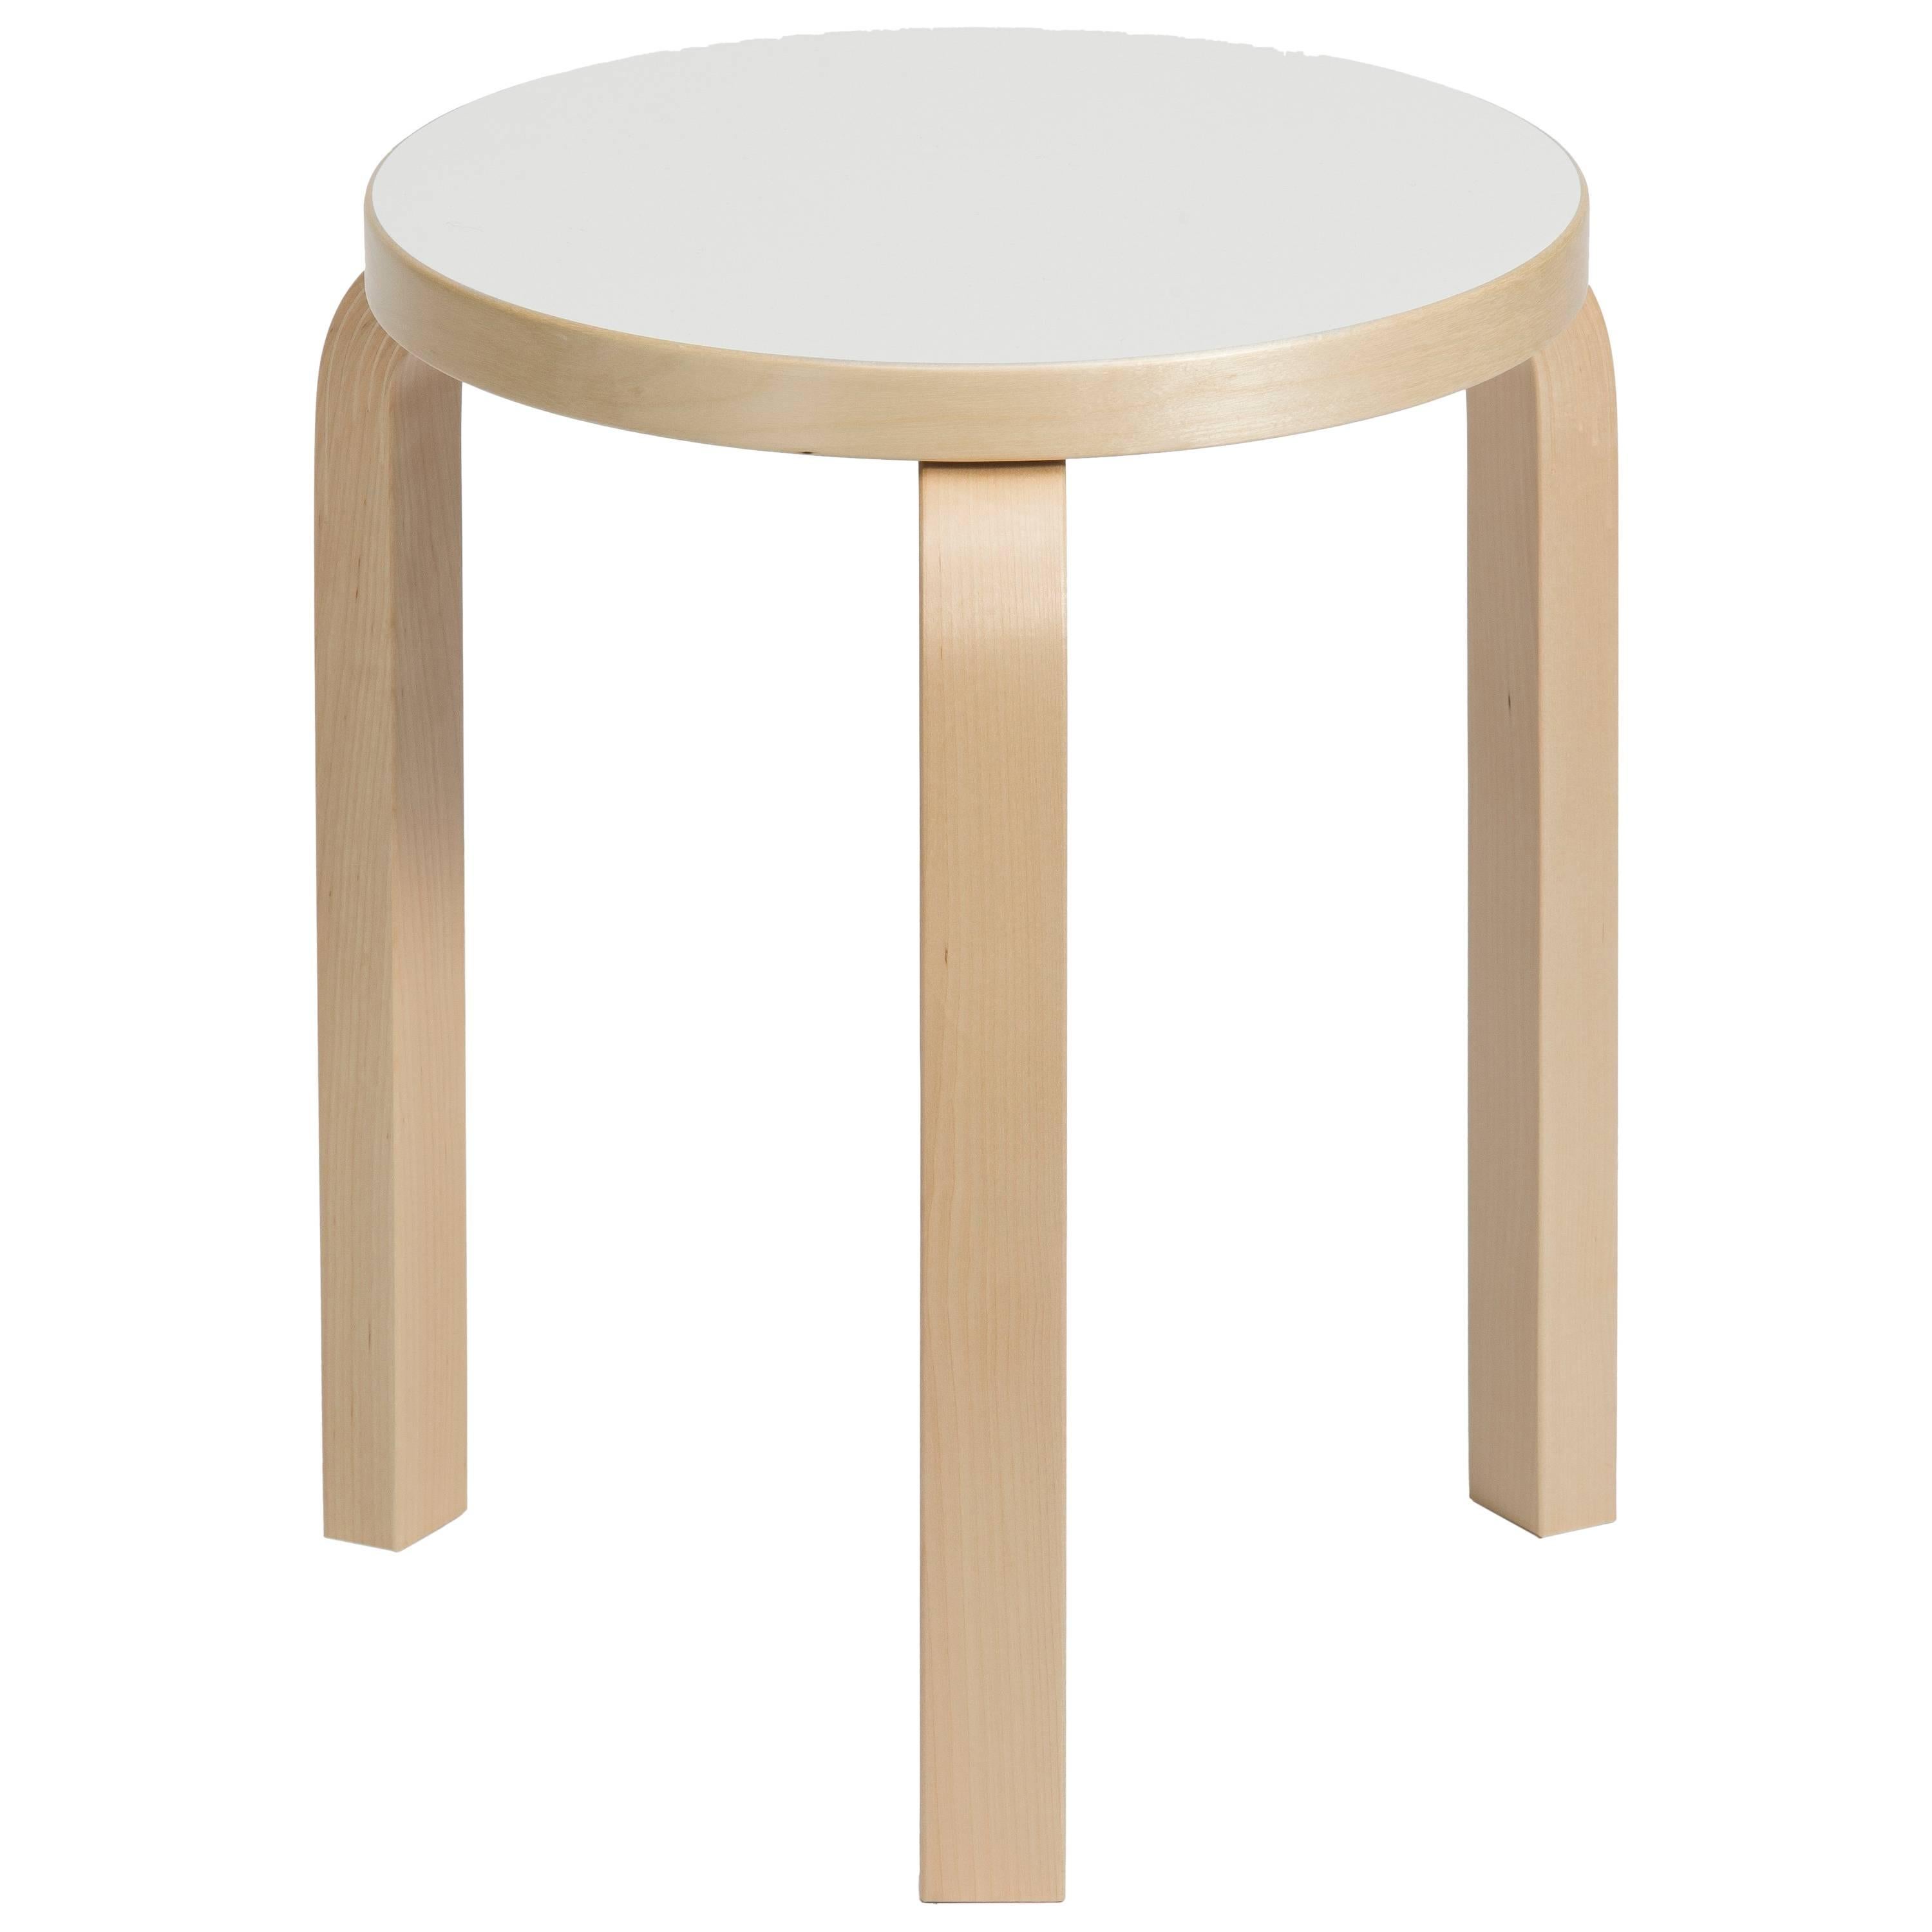 Authentic Stool 60 in Birch with White Laminate Seat by Alvar Aalto & Artek For Sale